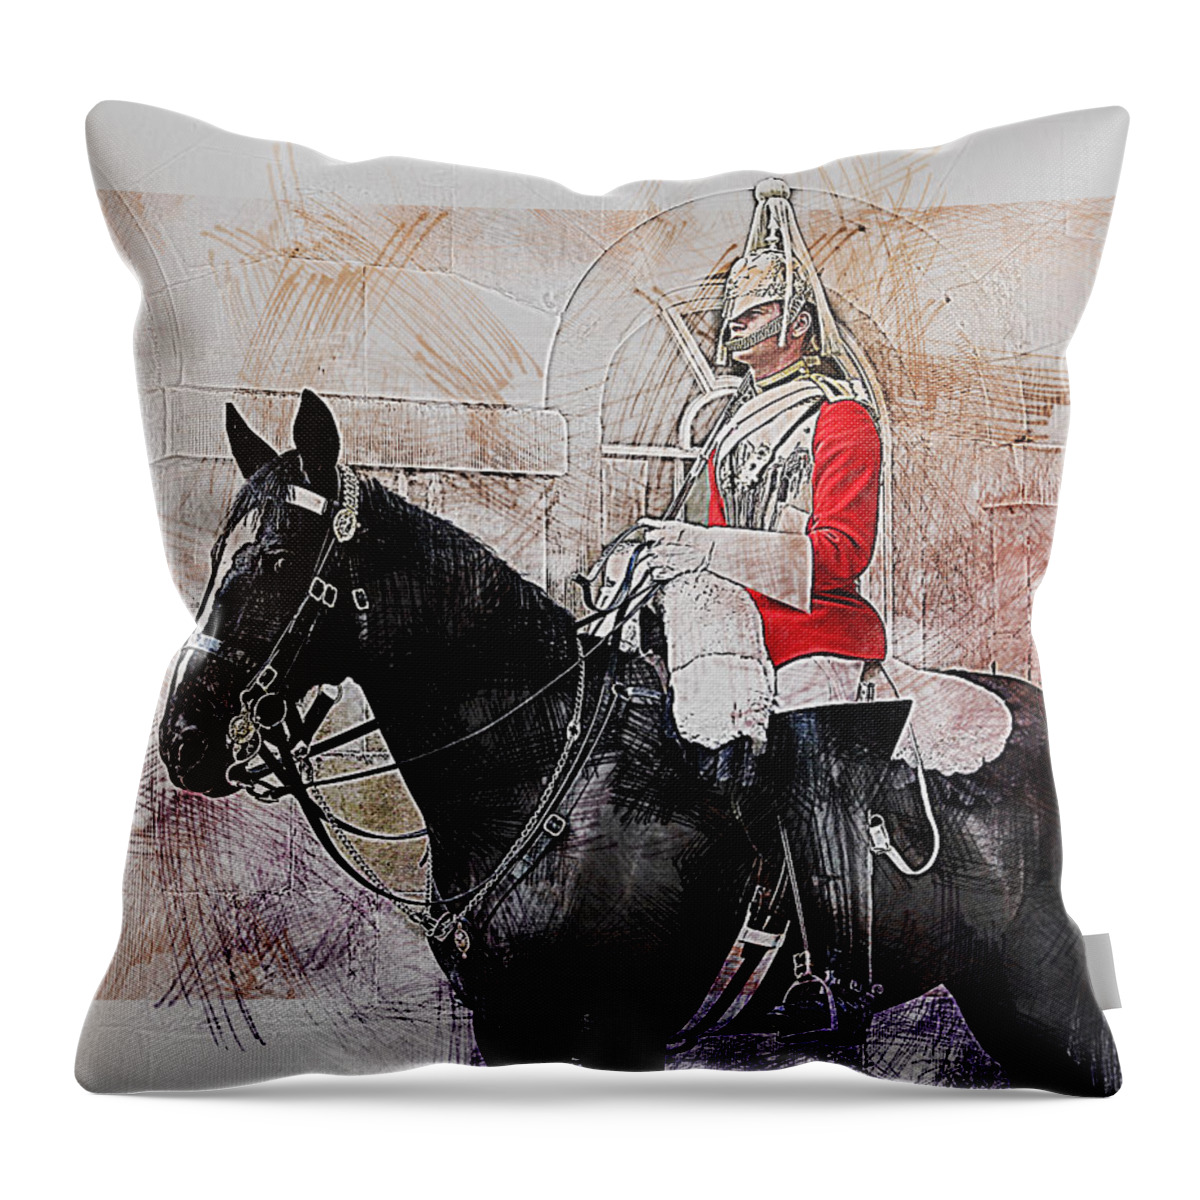 Household Cavalry Throw Pillow featuring the digital art Mounted Household Cavalry Soldier On Guard Duty in Whitehall Lon by Anthony Murphy